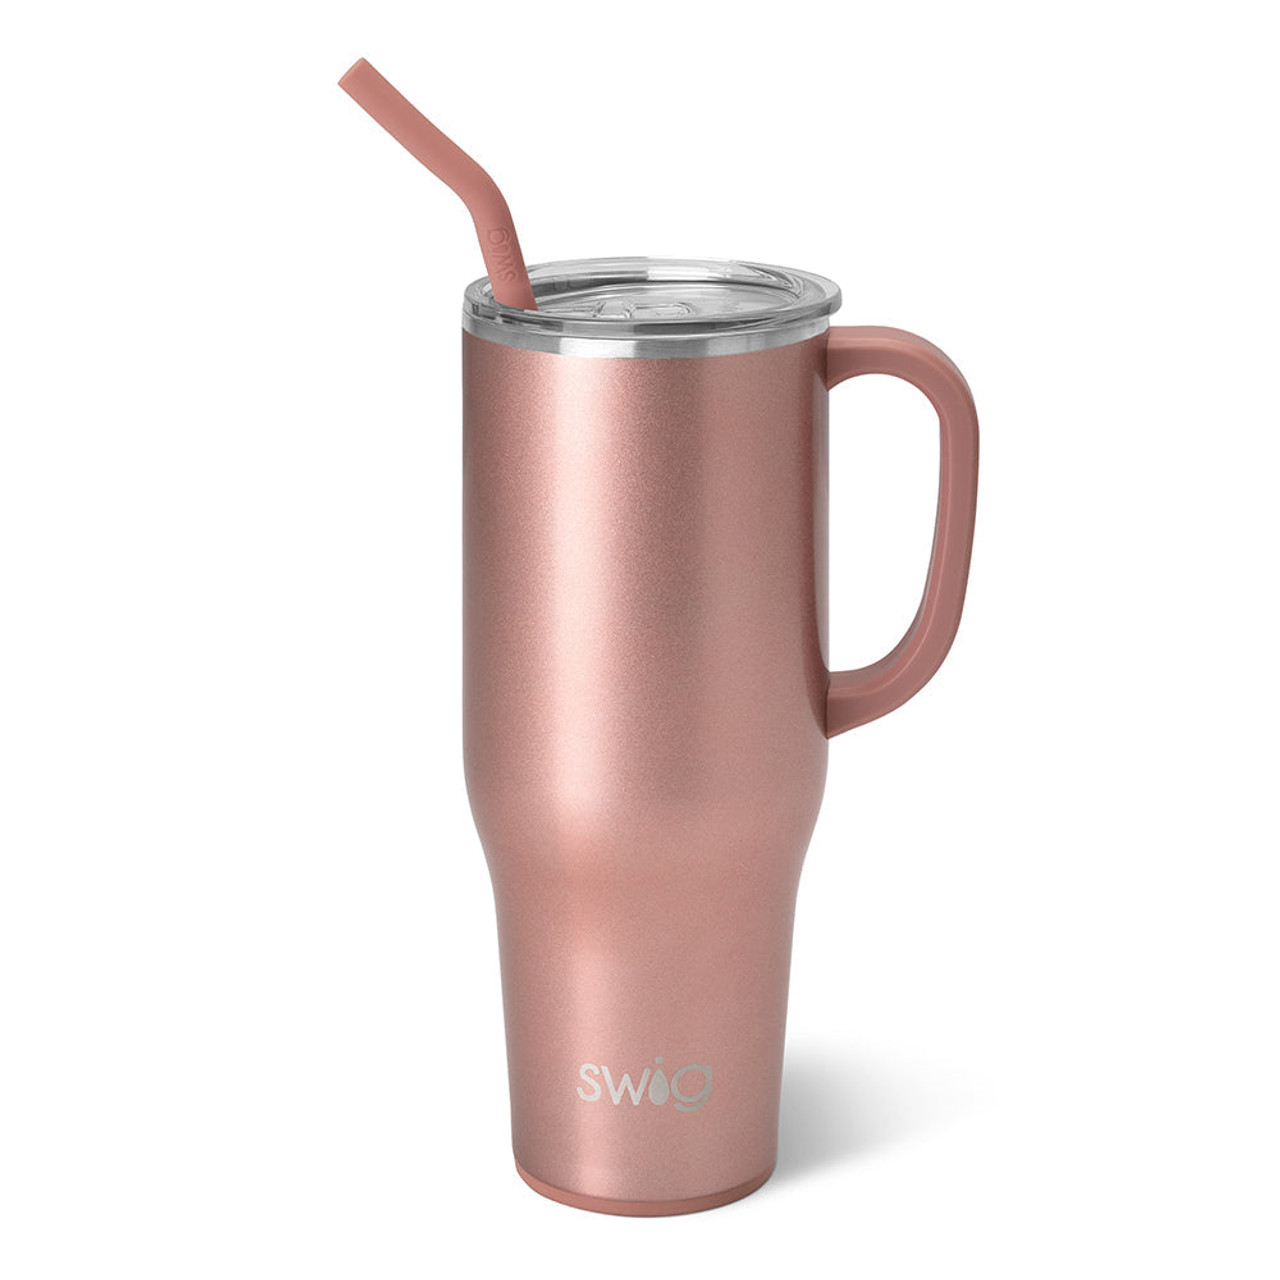 https://cdn11.bigcommerce.com/s-yhl8wqmxu2/images/stencil/1280x1280/products/83889/48201/swig-life-signature-40oz-insulated-stainless-steel-mega-mug-with-handle-shimmer-rose-gold-main__08806.1679932504.jpg?c=2